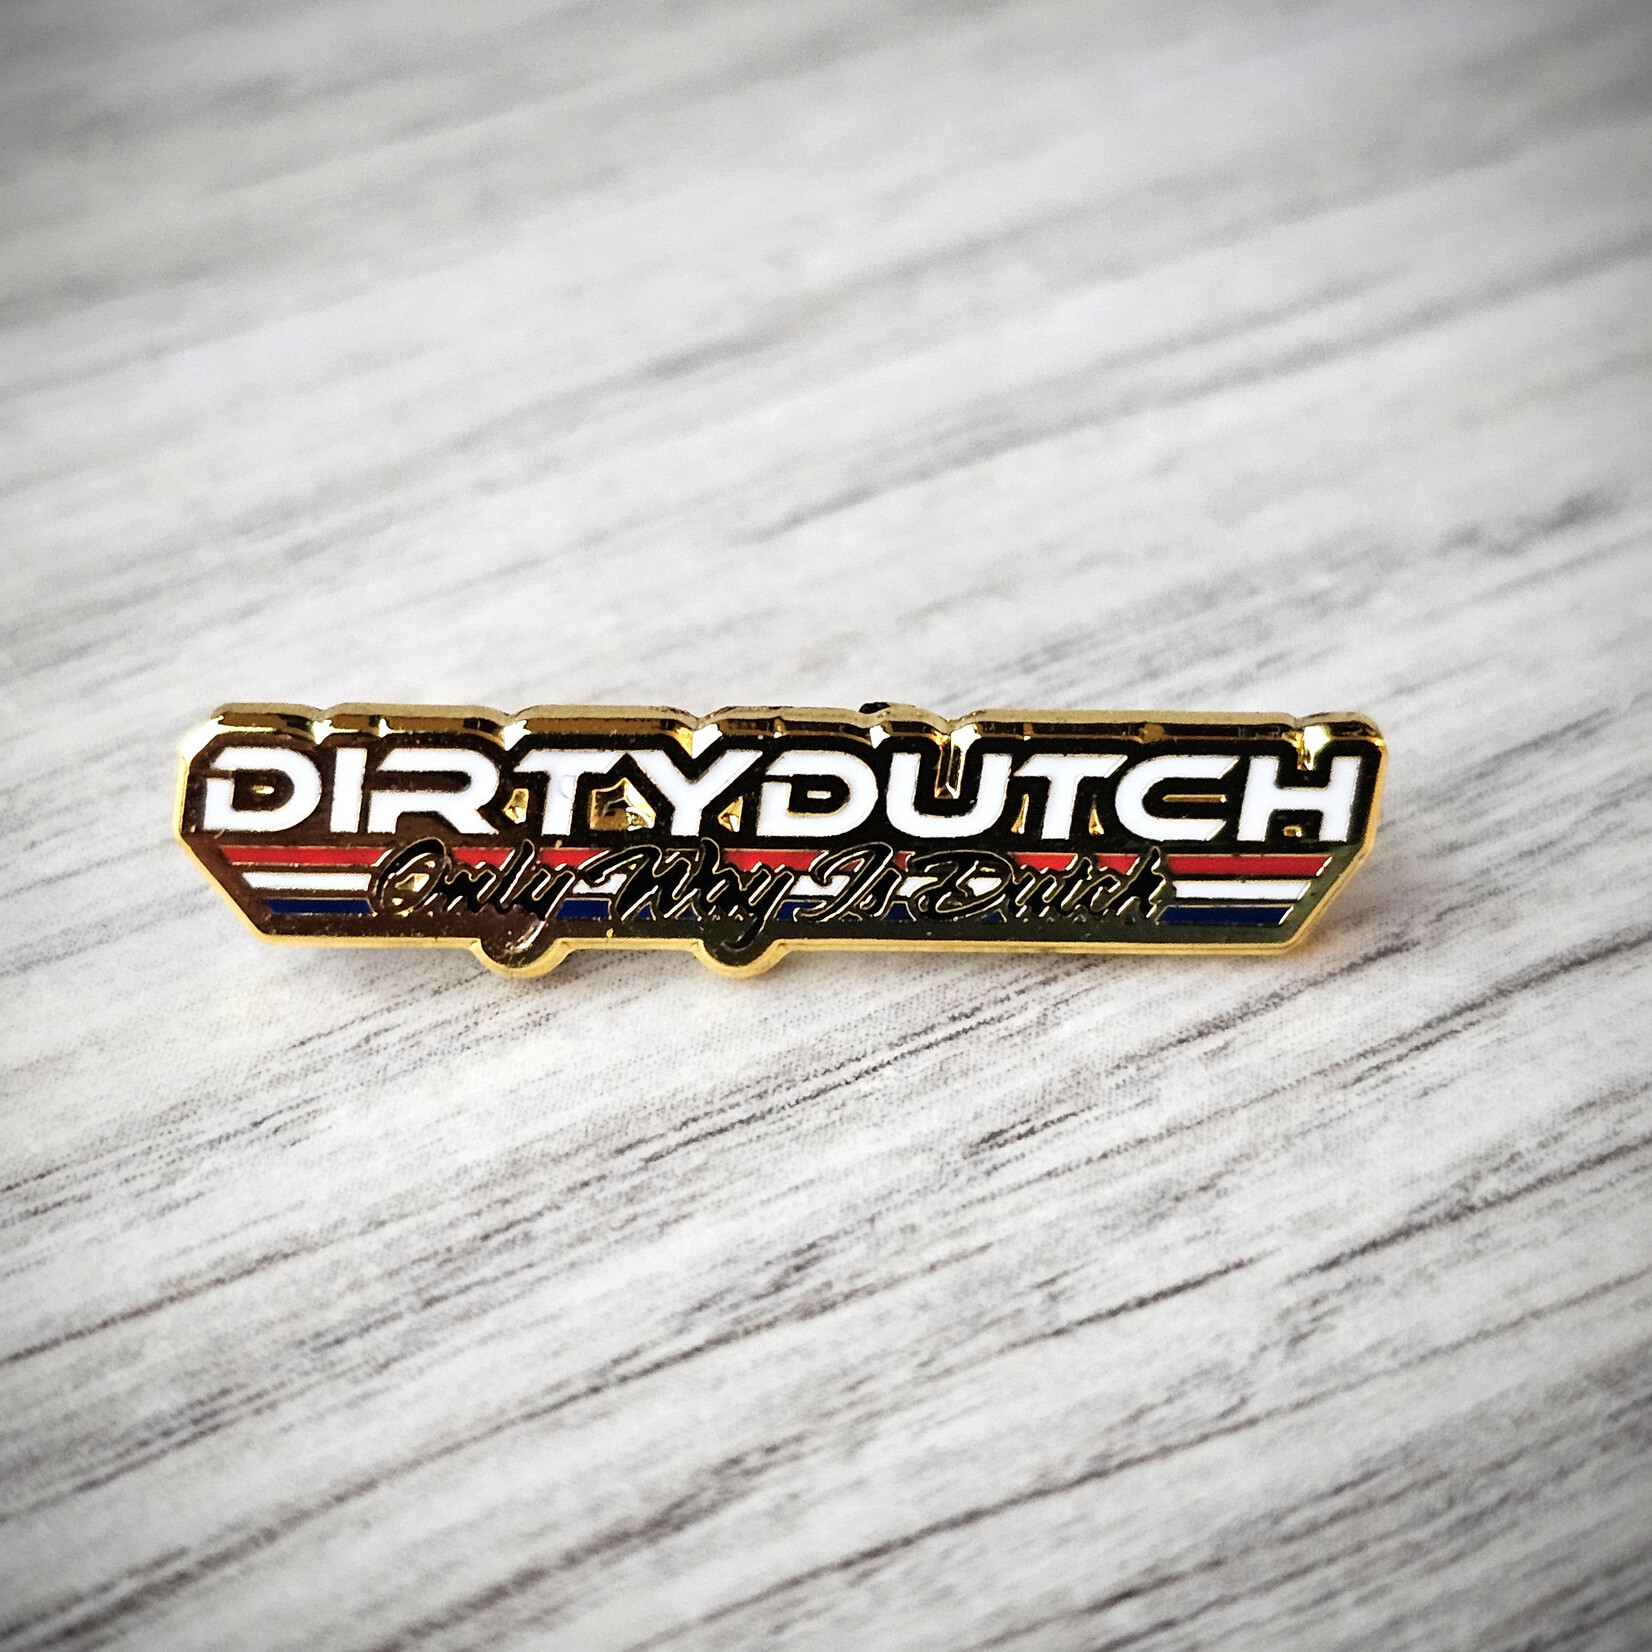 ONLY WAY IS DUTCH Only Way Is Dutch Pin - Dirty Dutch